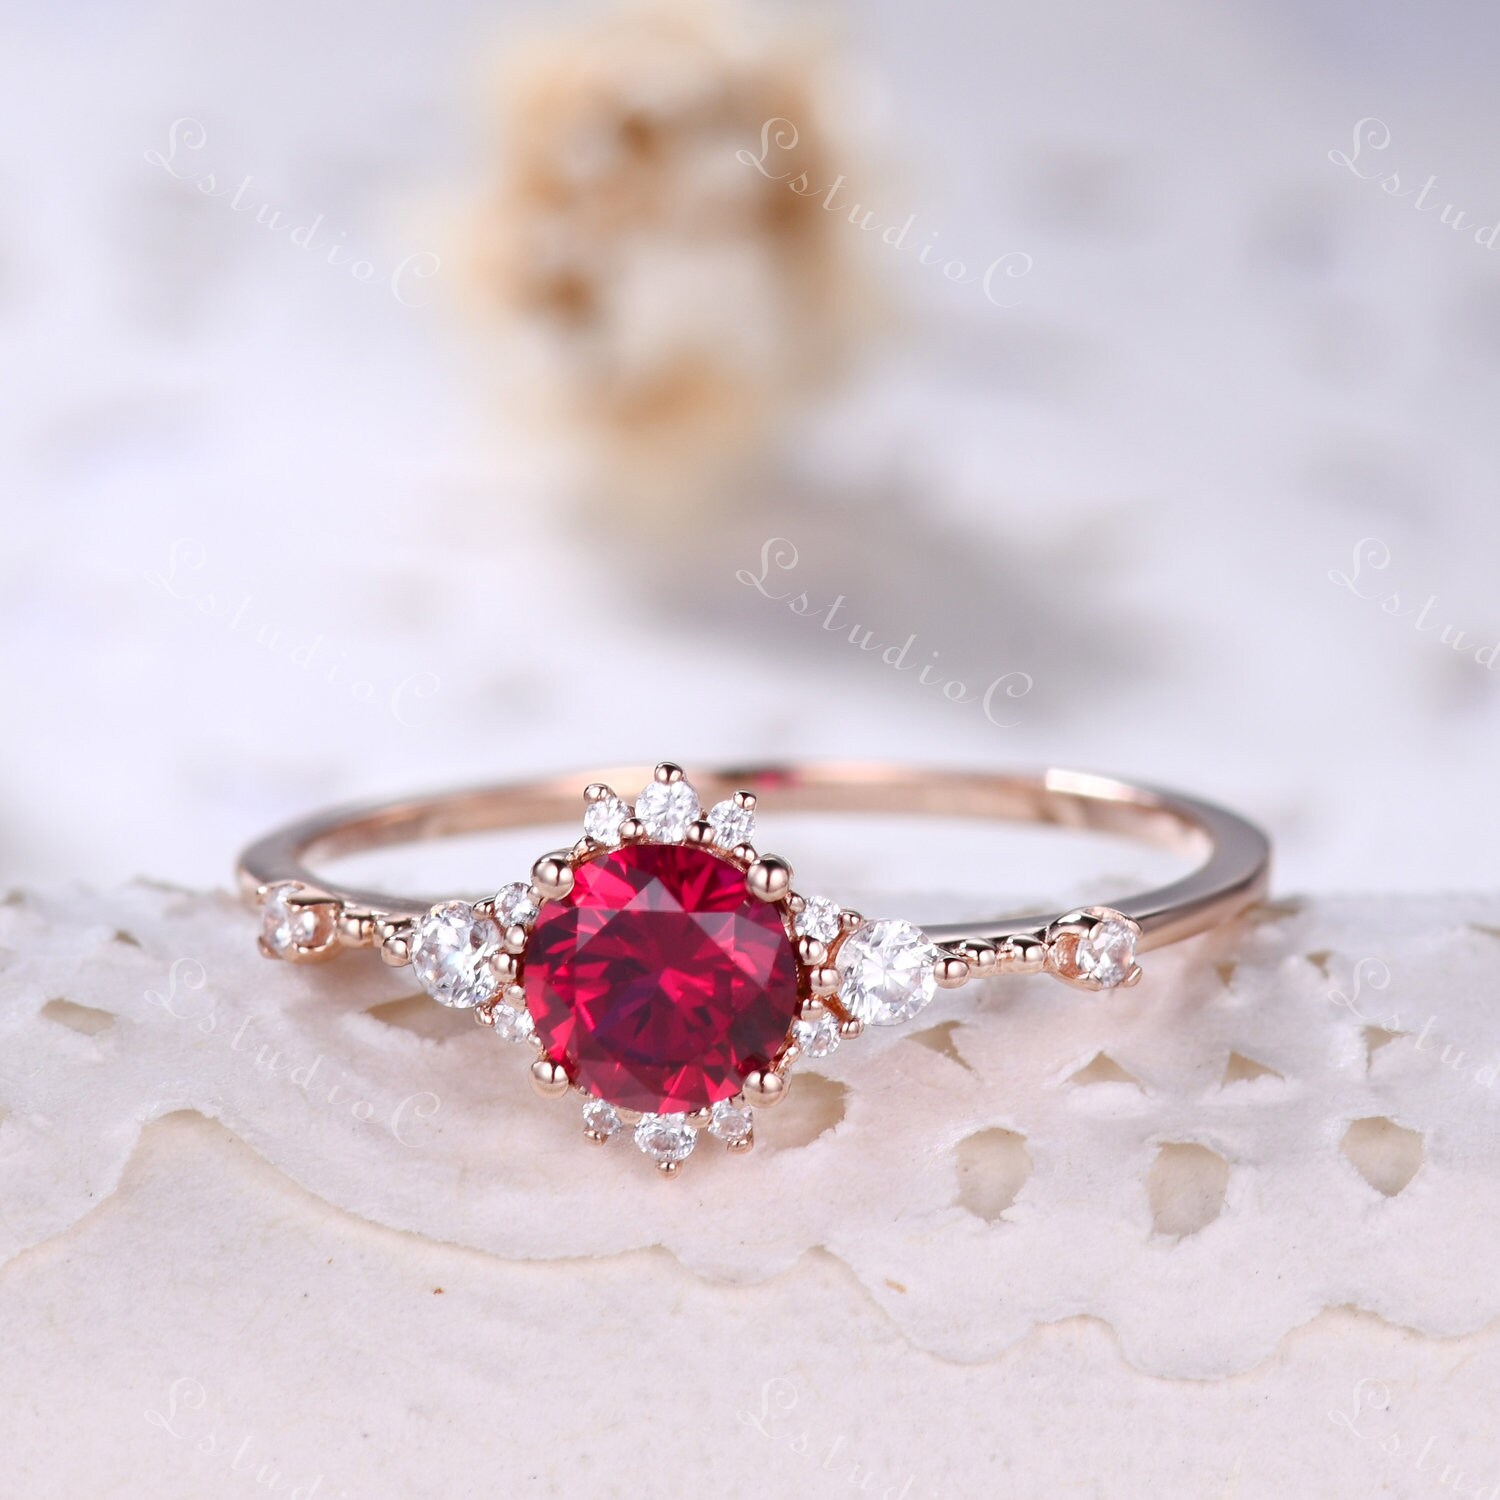 Antique Ruby Ring Vintage Ruby Engagement Ring Ruby Gemstone - Etsy